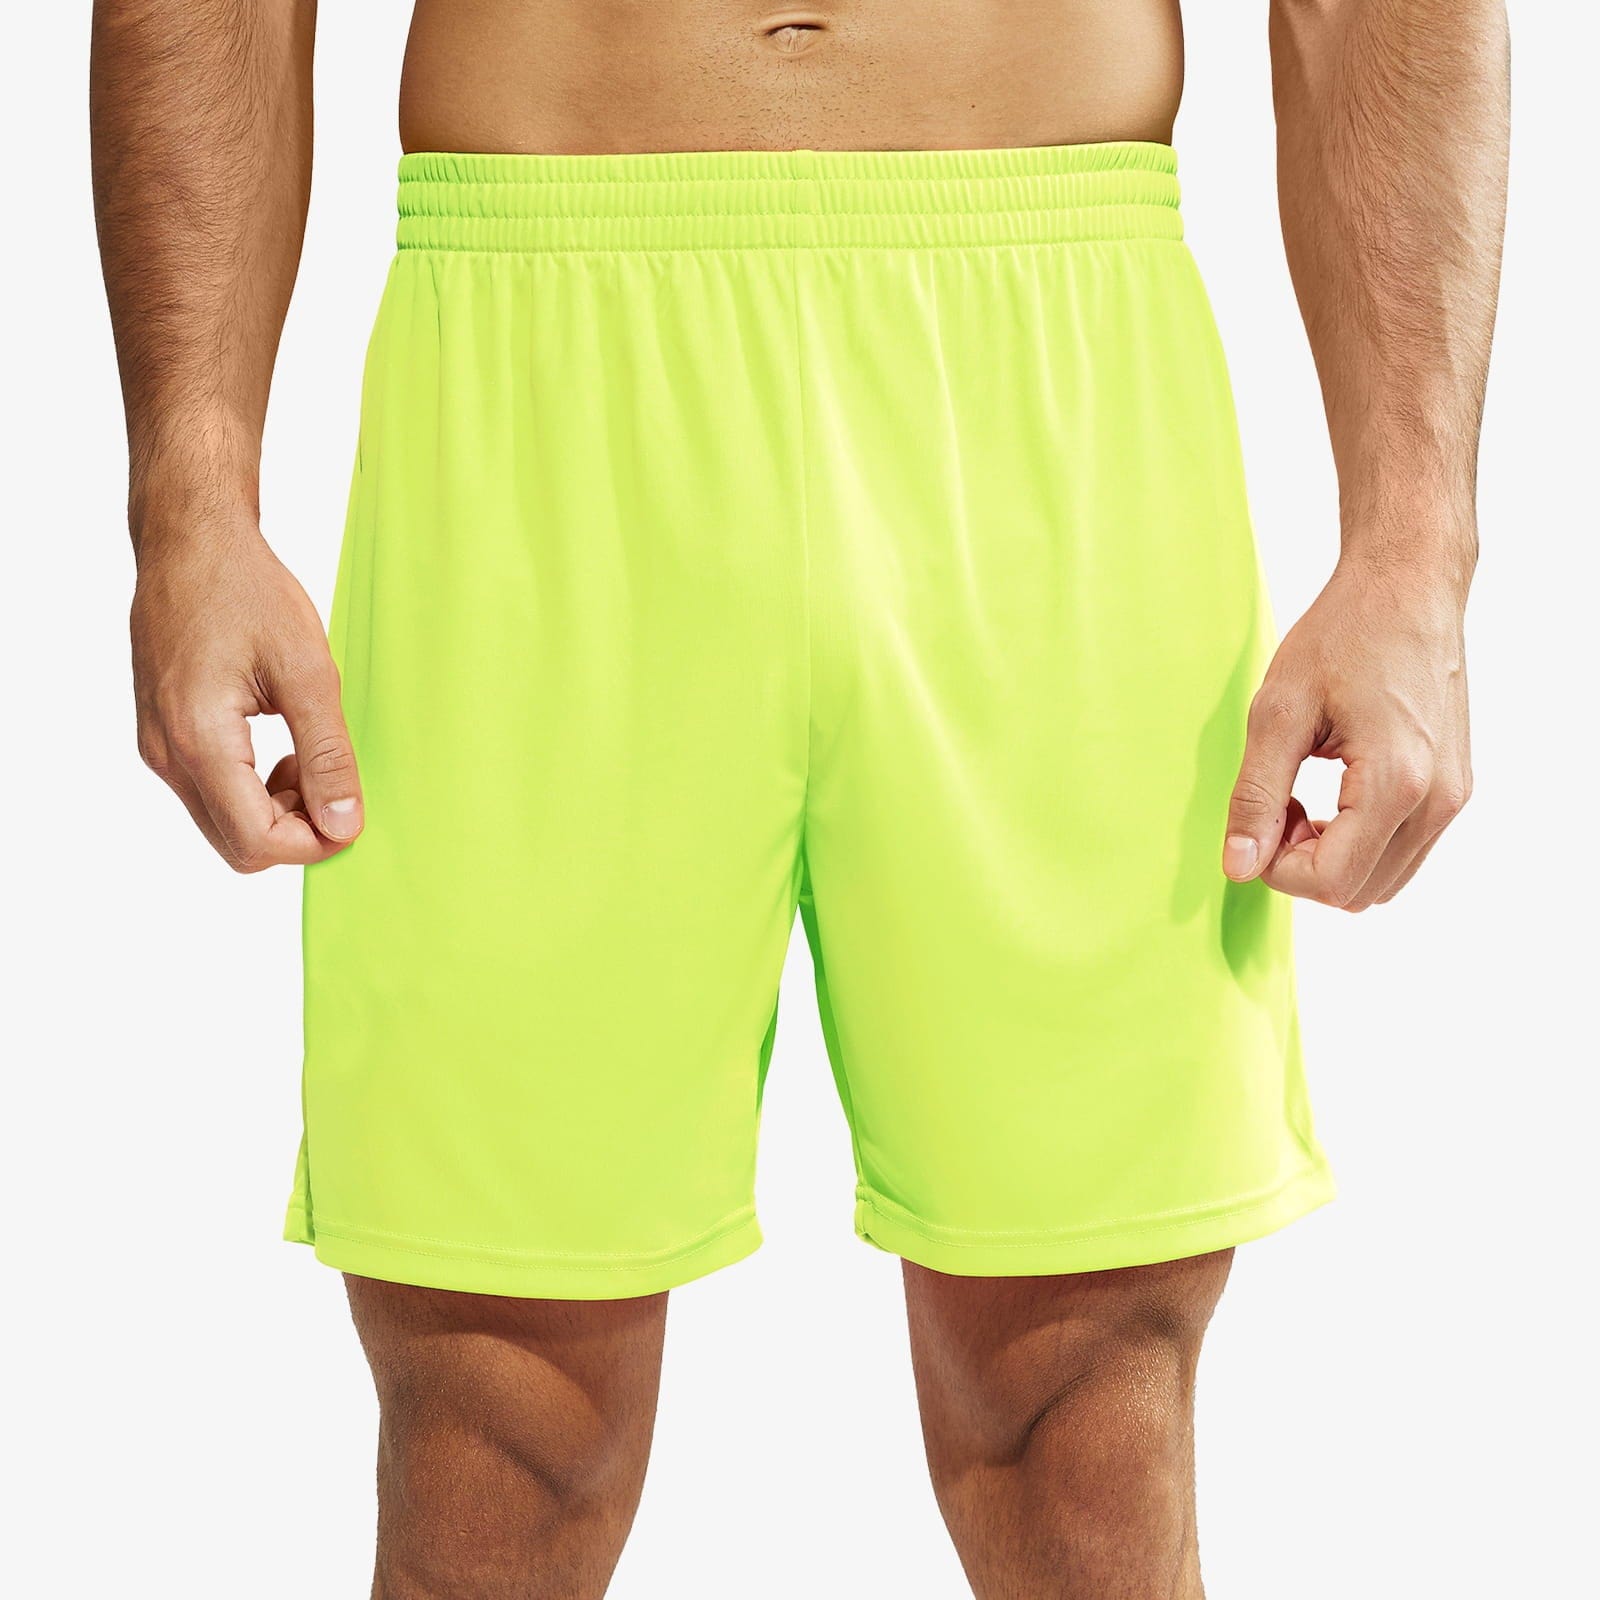 Men's Quick-Dry Athletic Running Shorts without Pockets Men's Shorts MIER